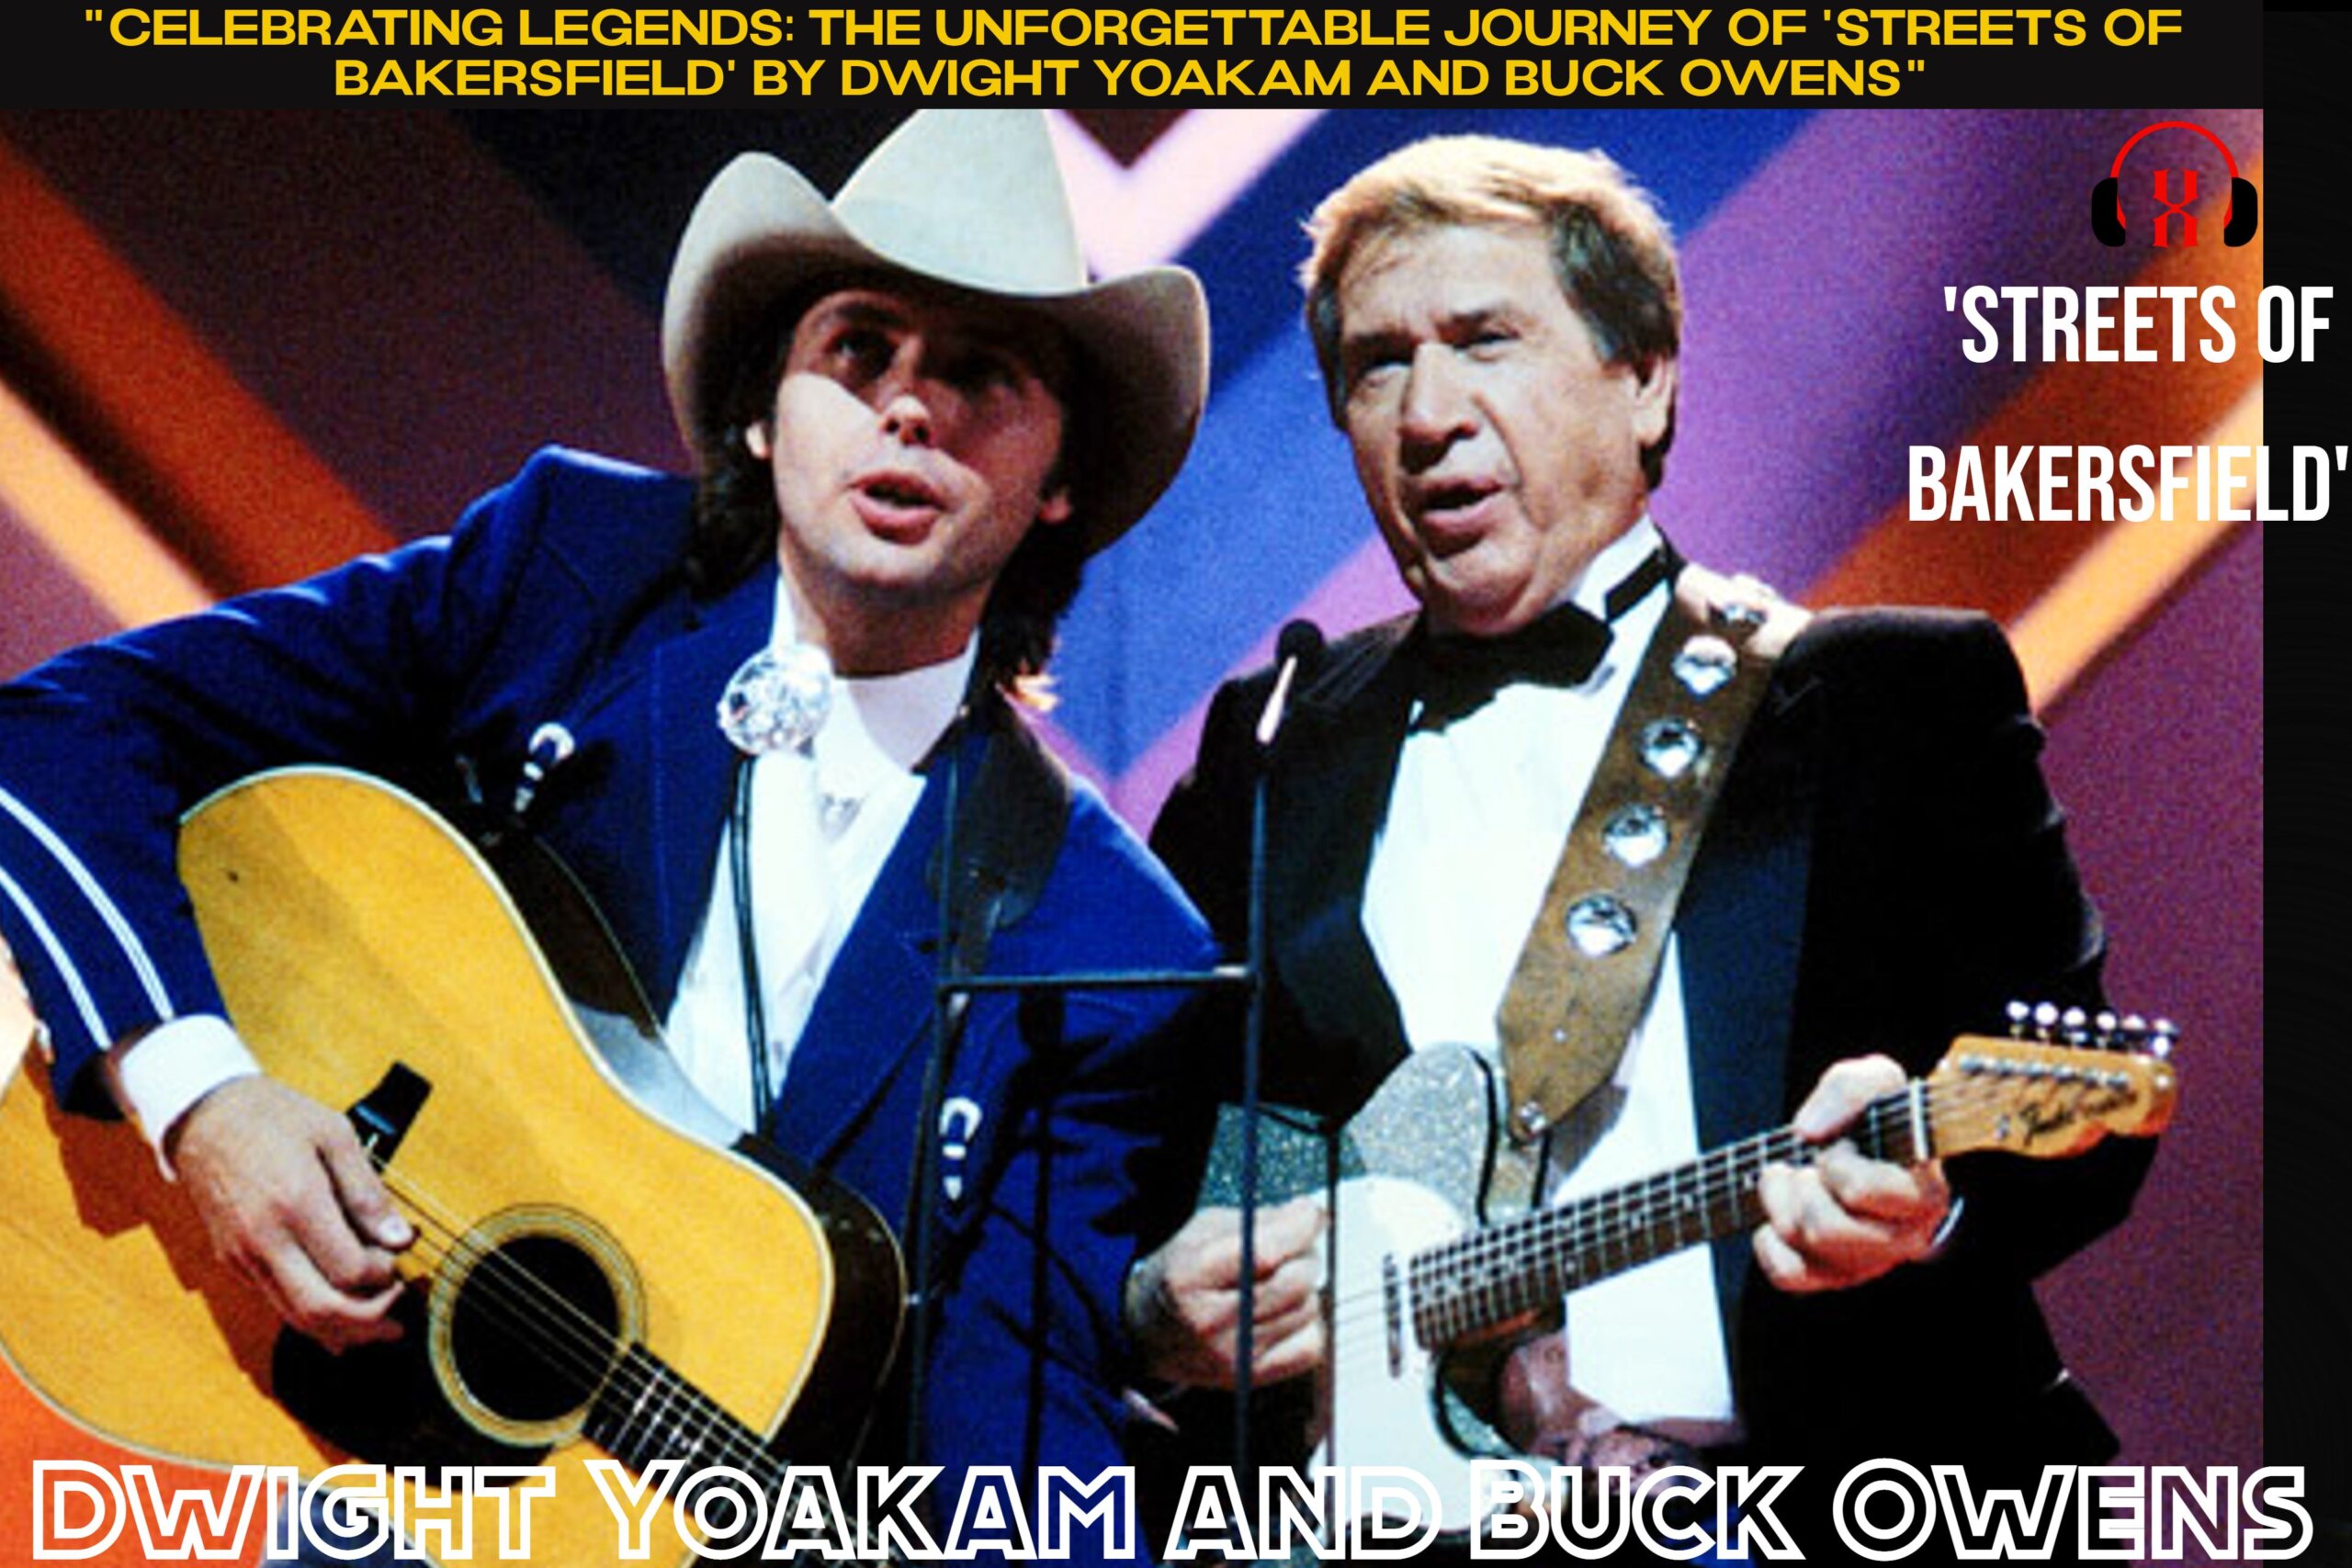 “Celebrating Legends: The Unforgettable Journey of ‘Streets Of Bakersfield’ by Dwight Yoakam and Buck Owens”